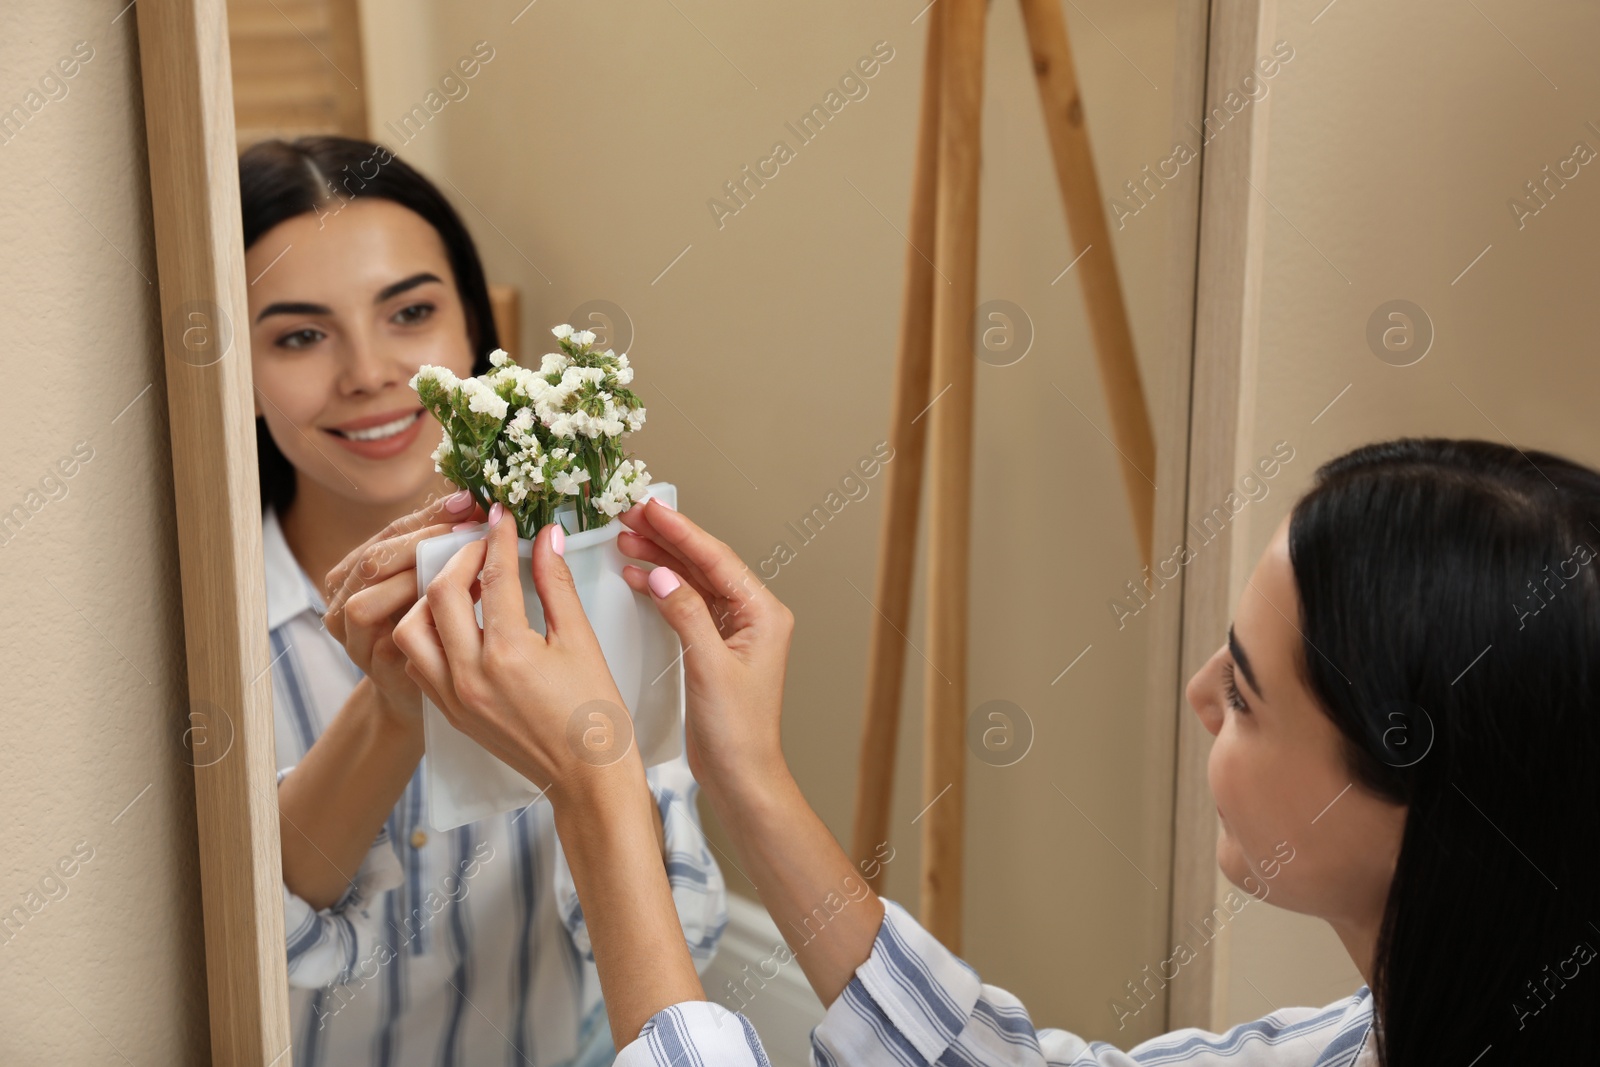 Photo of Happy woman putting flowers into silicone vase attached to mirror in room